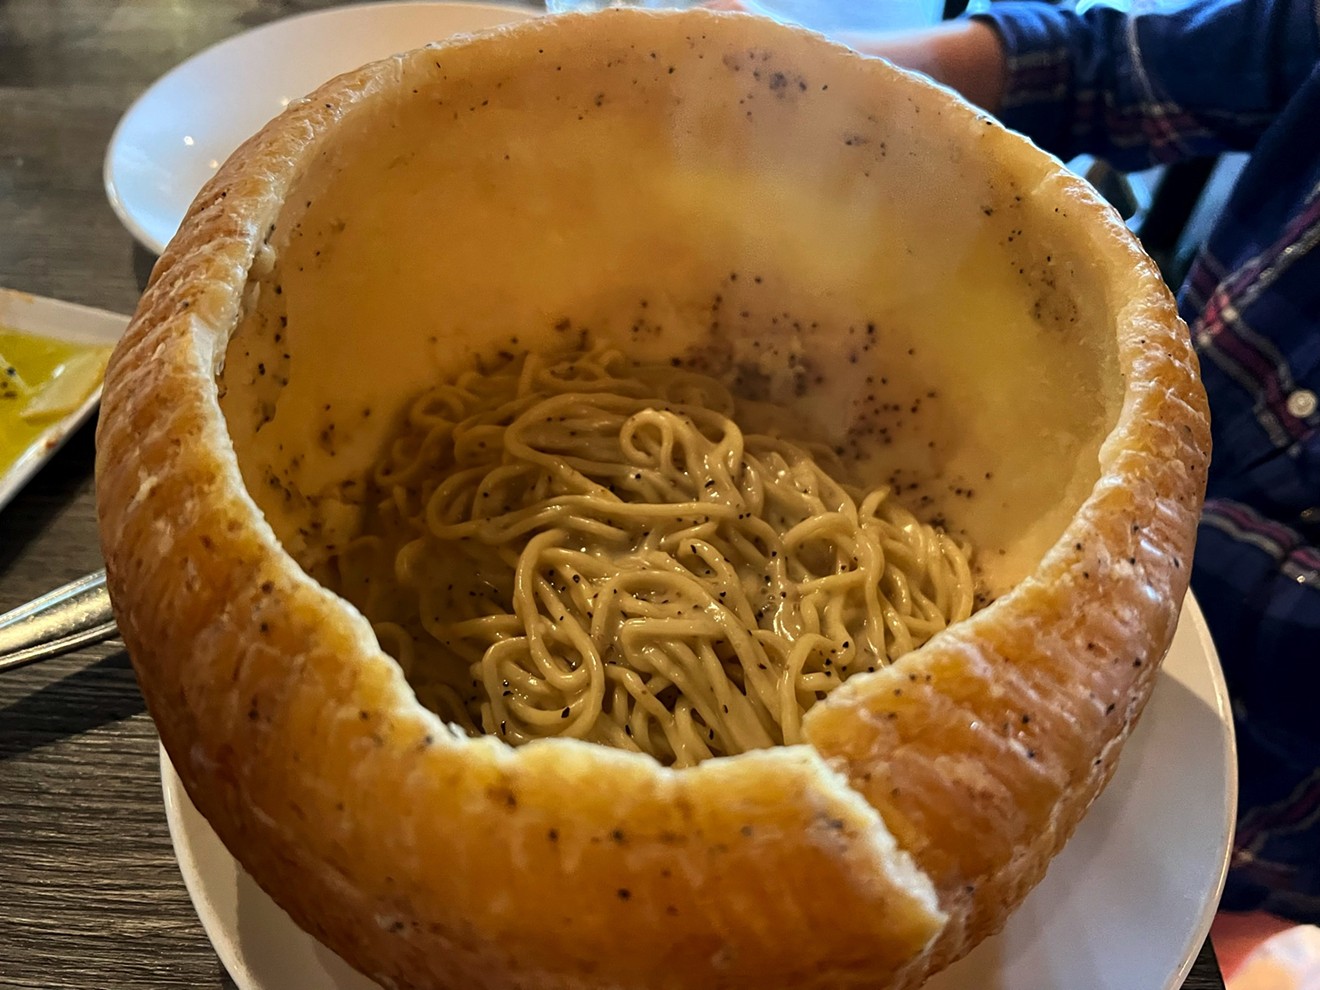 Pasta with cacio e pepe comes in a hollowed-out wheel of Parmesan at Numero 28. Order one and watch neighboring tables follow suit.